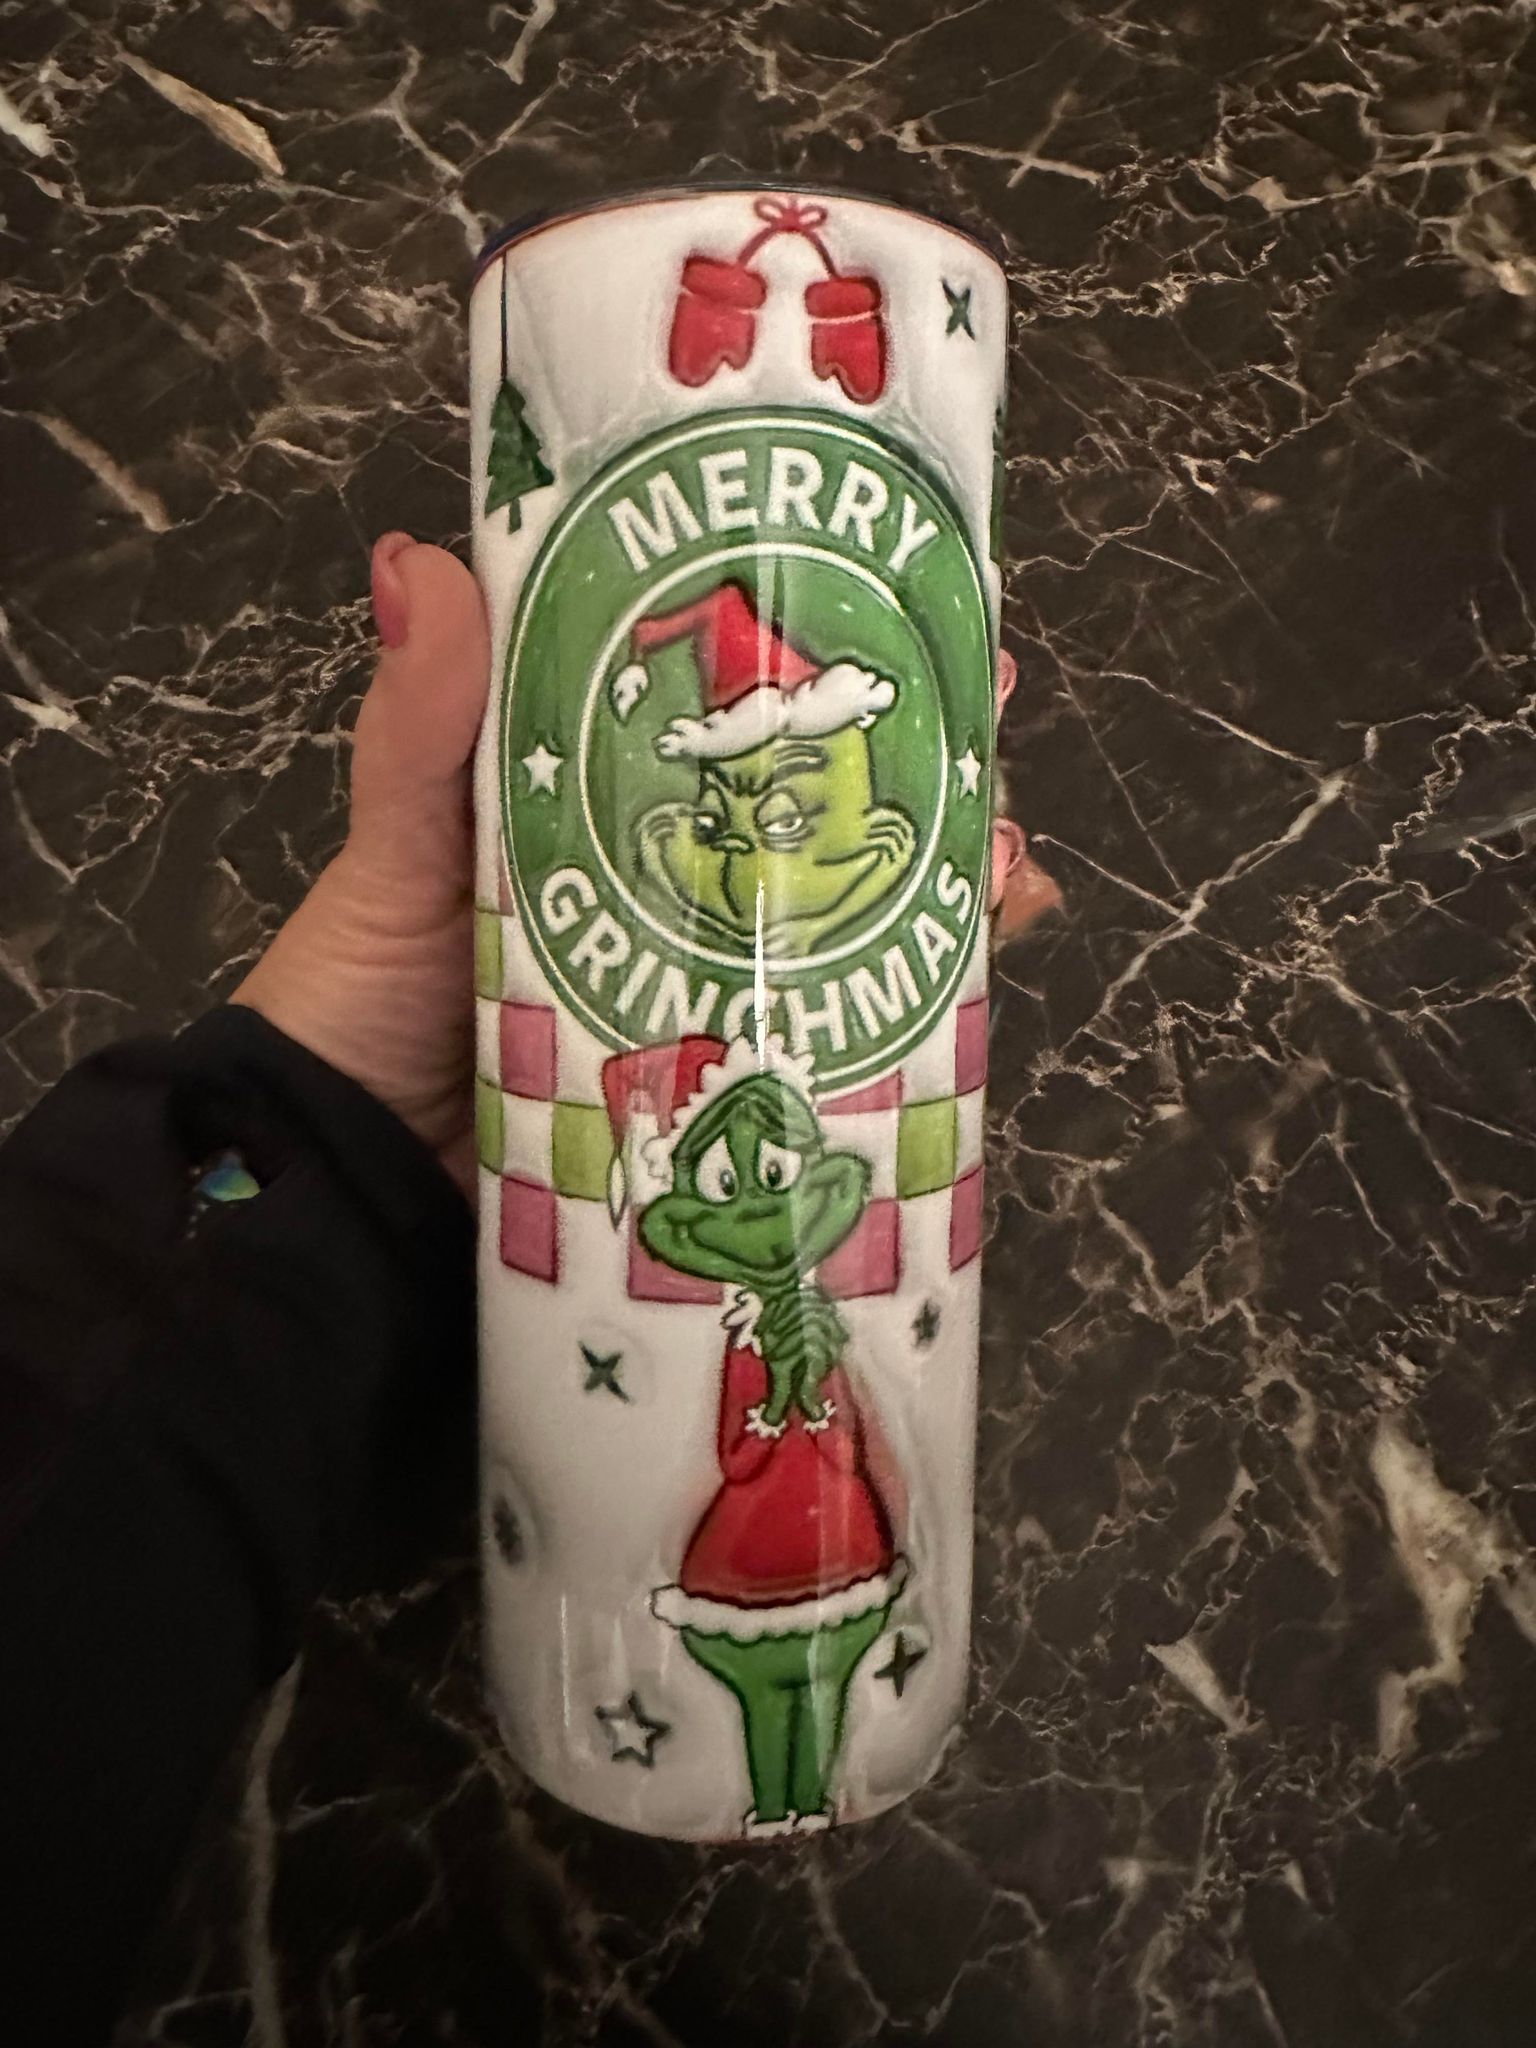 Stainless Steel Merry Grinchmas Tumbler w/Lid & Straw